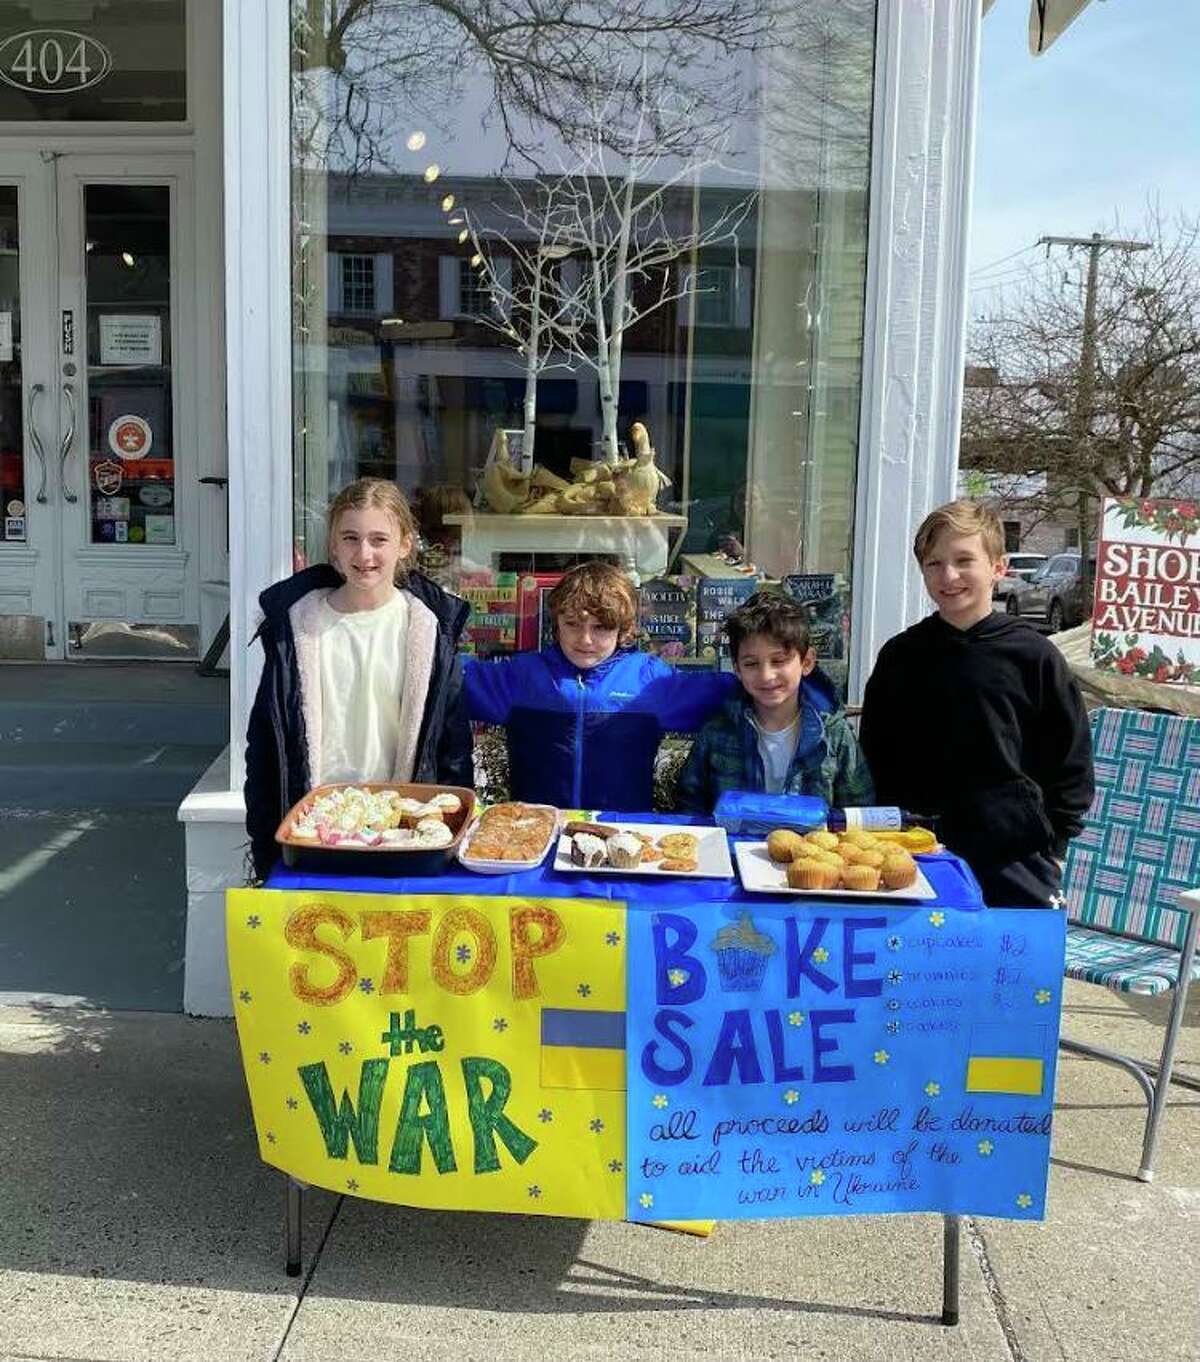 Viktoria Berisha, left, Jozef Berisha, Oliver Potter and Ian Potter, of South Salem, N.Y., held a bake sale in front of Books on the Common to benefit relief efforts in Ukraine. They raised more than $600.